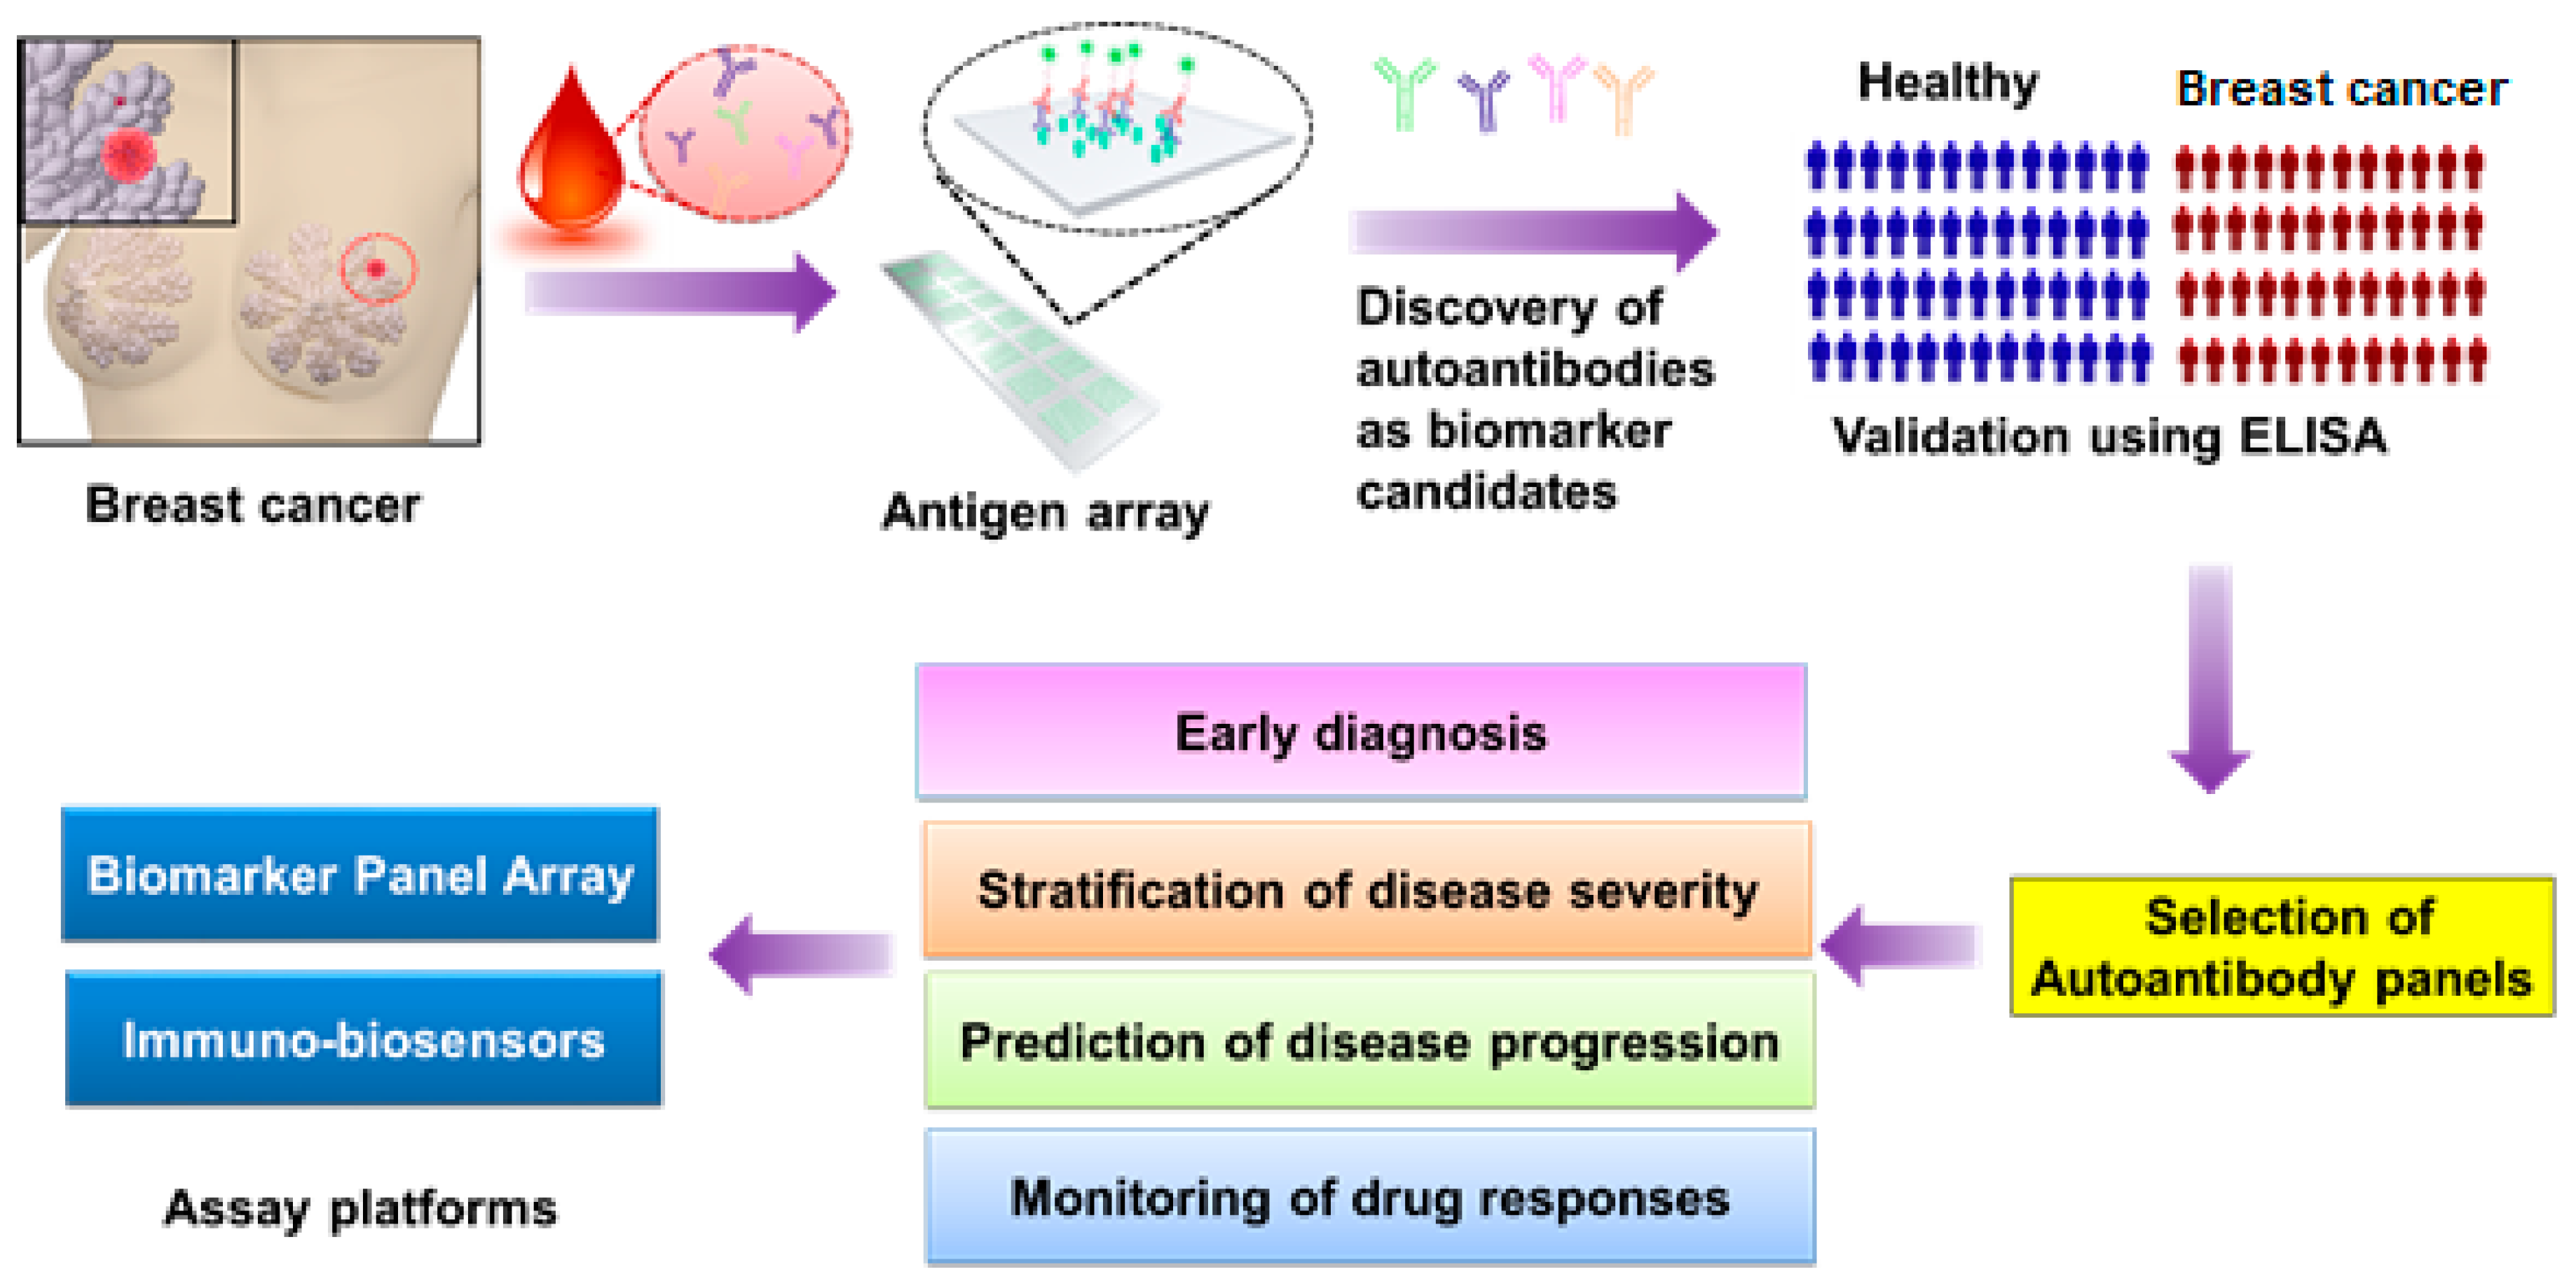 Flowchart of autoantibody biomarker discovery and detection in breast cancer.